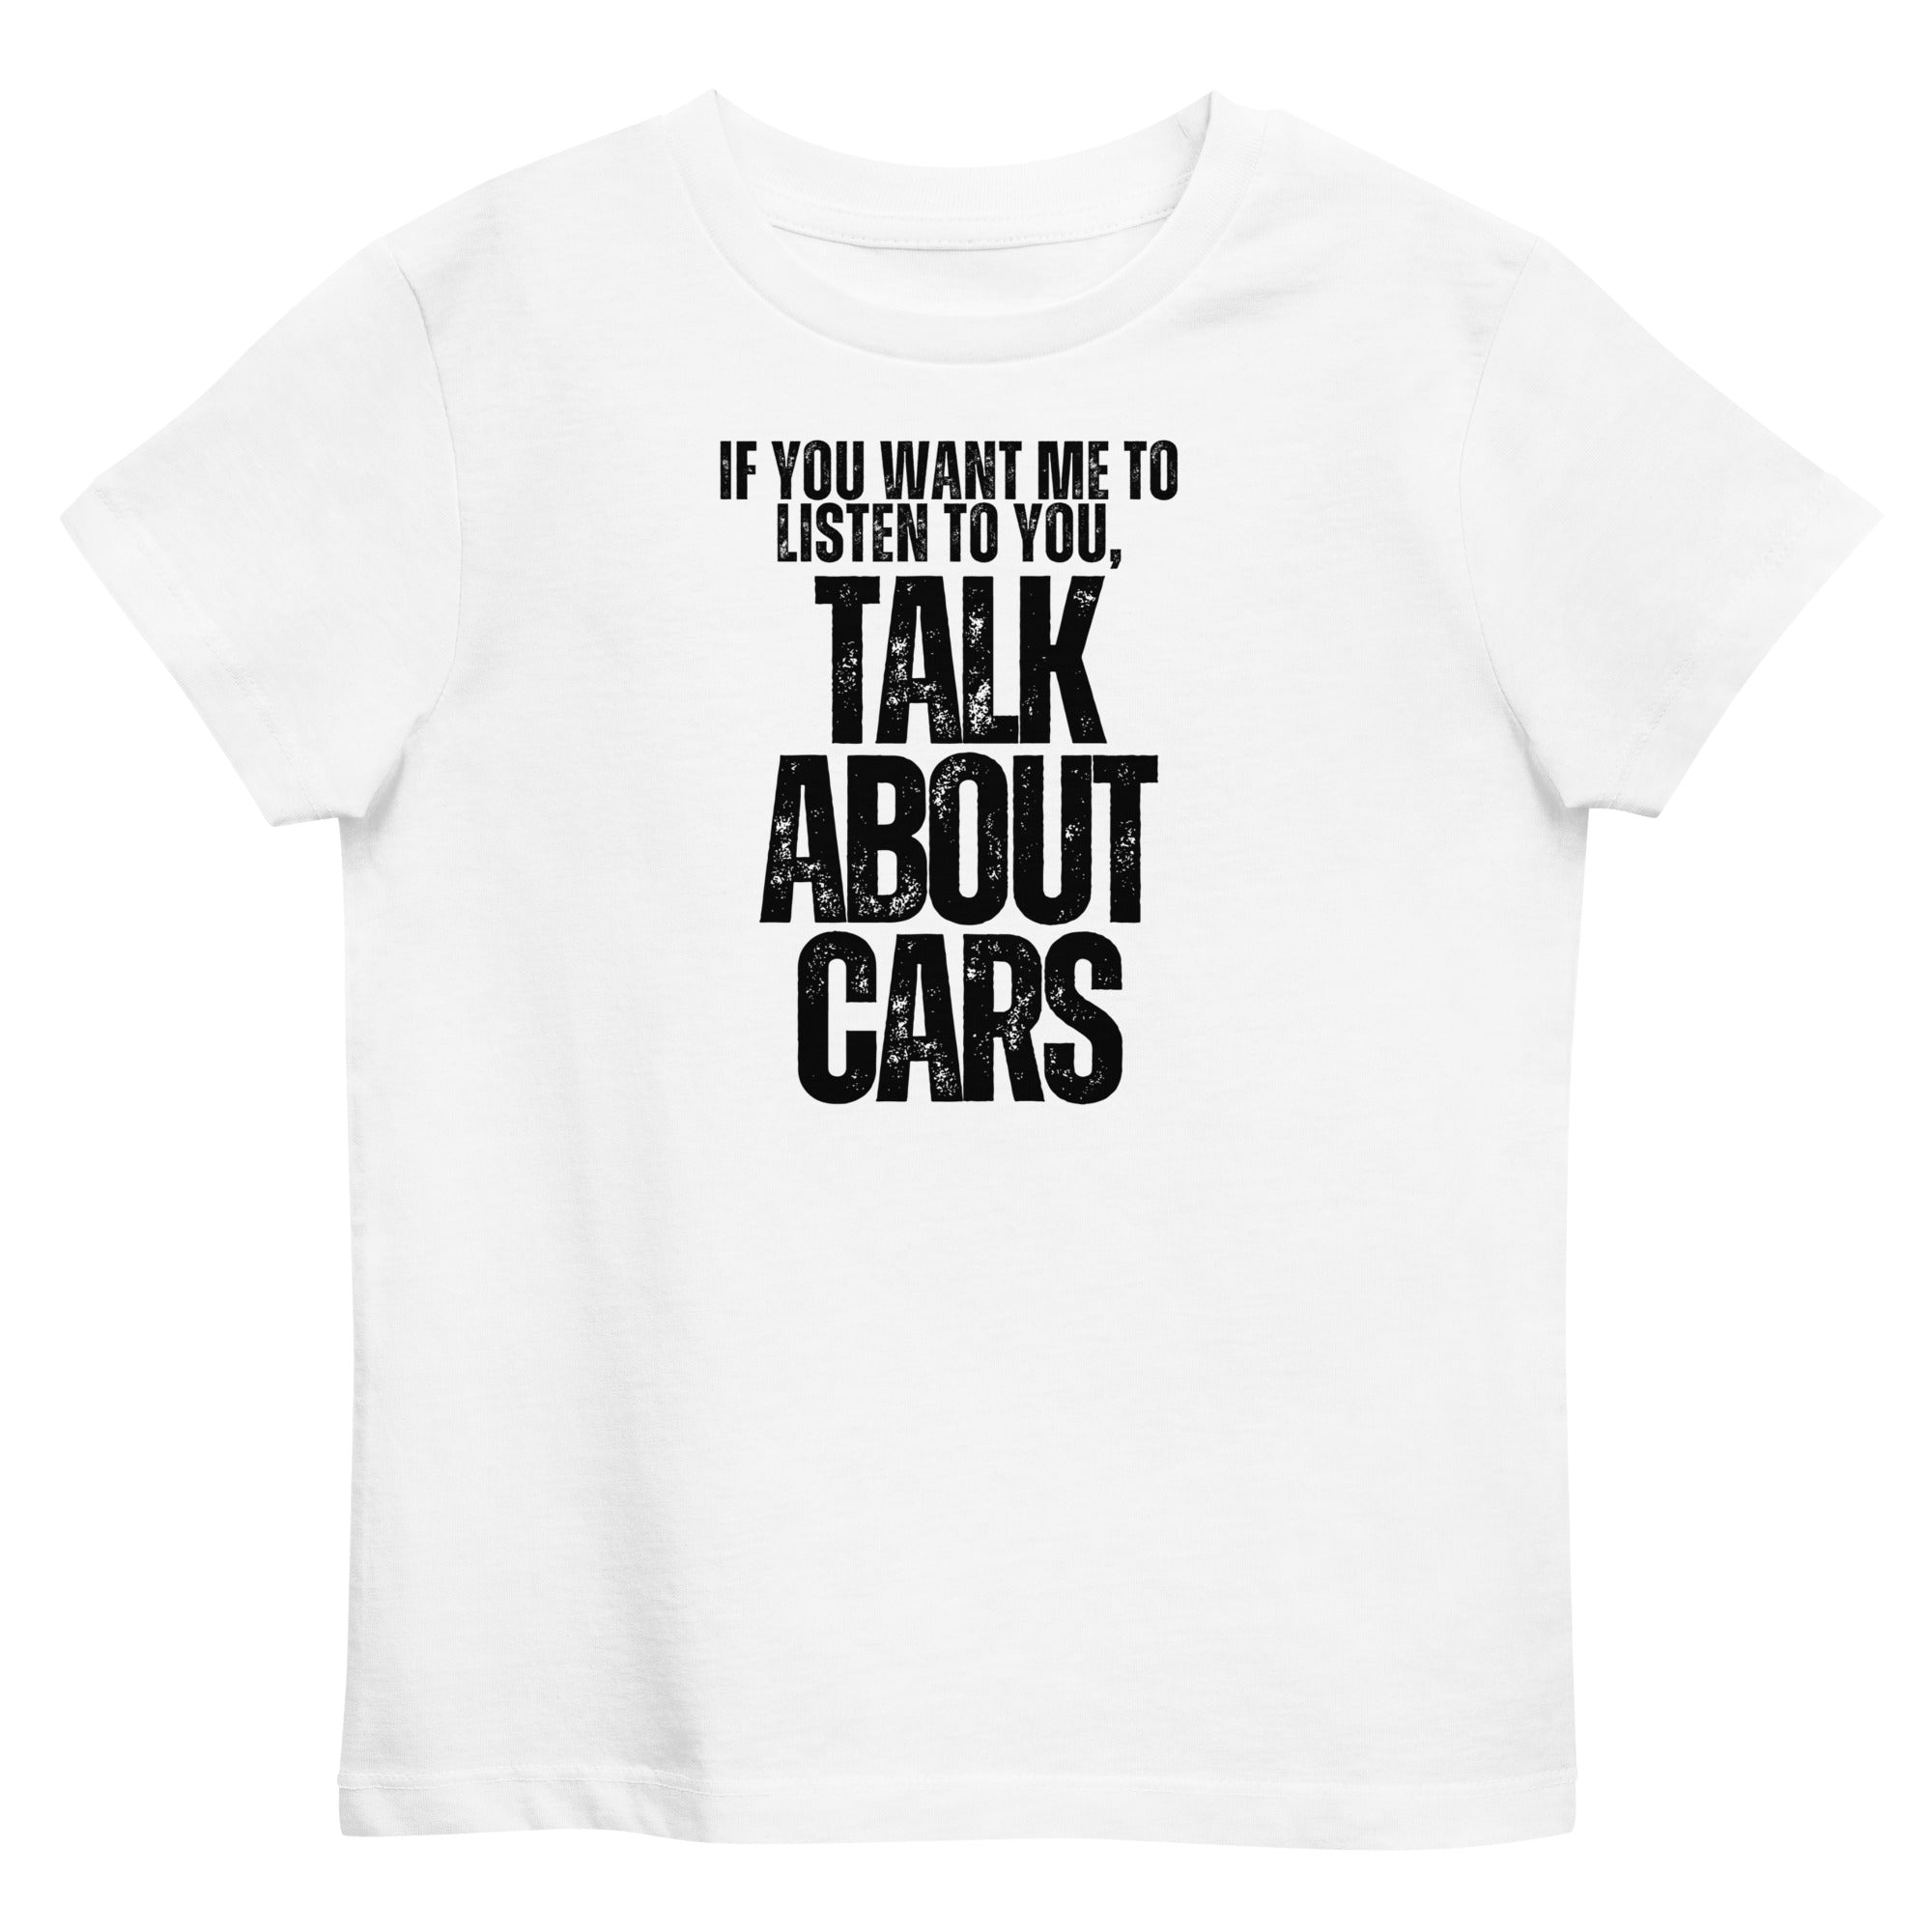 If You Want Me To Listen To You Talk About Cars - Kids